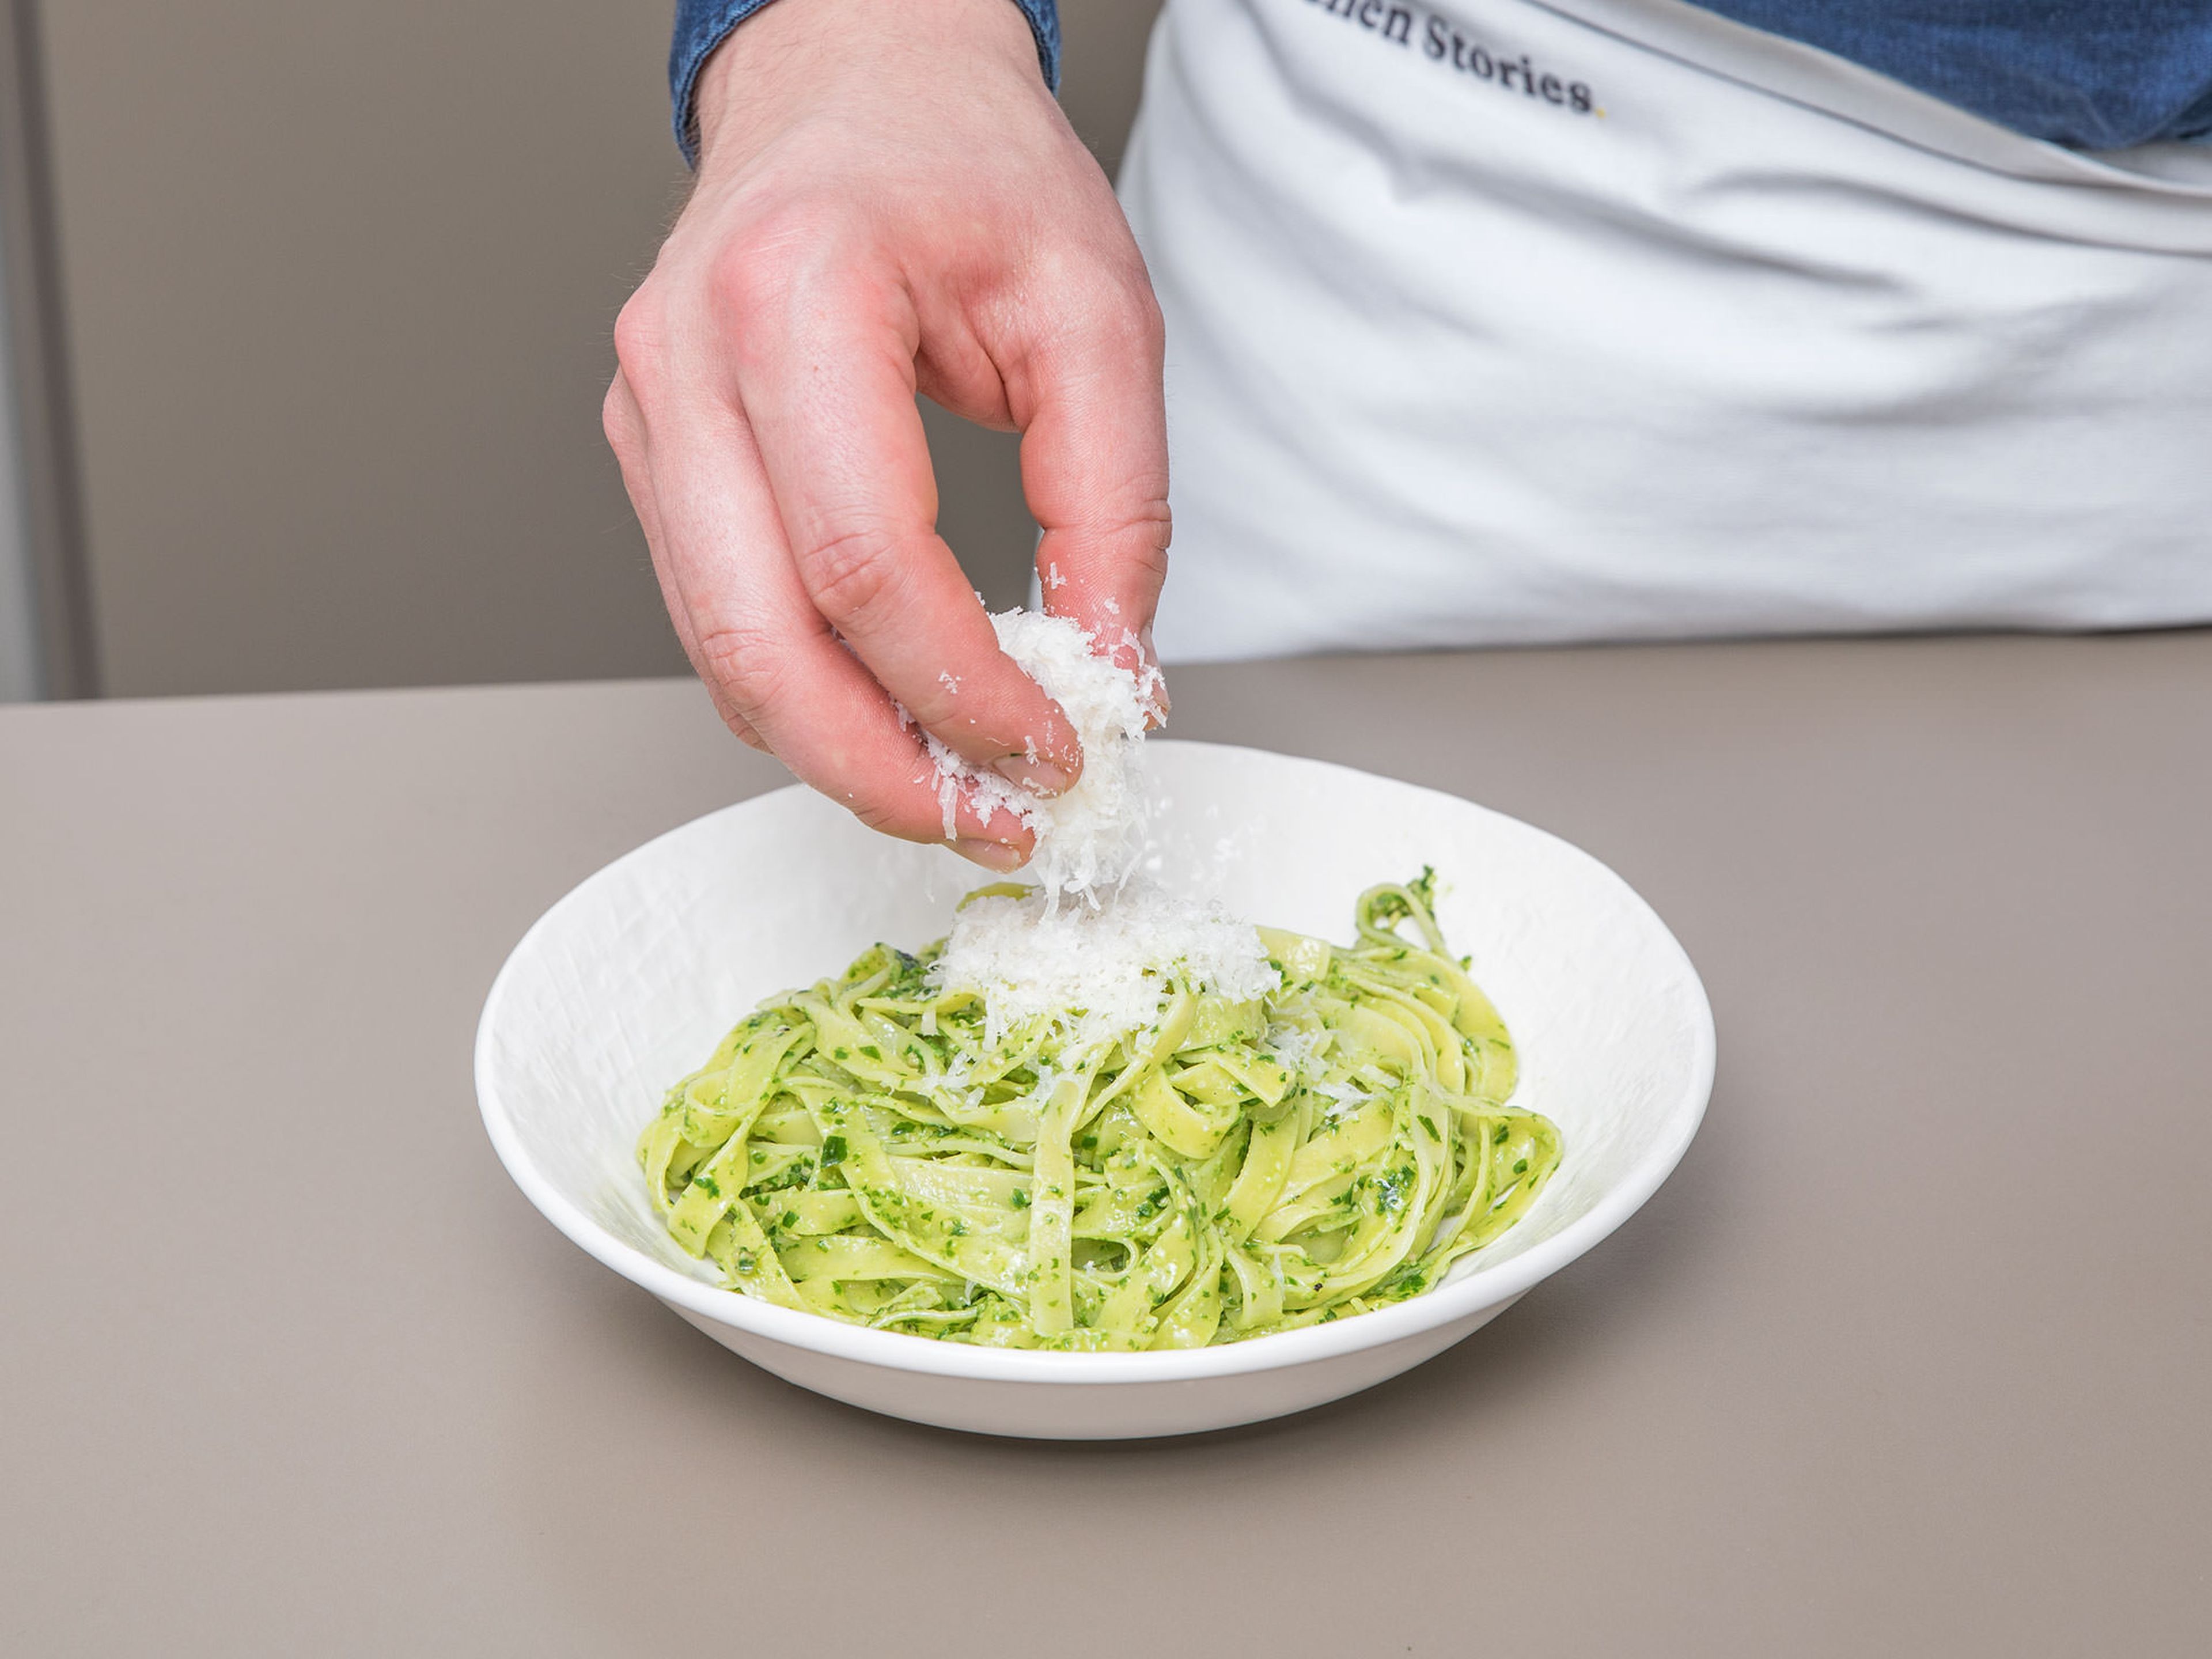 Combine drained tagliatelle with wild garlic pesto. Serve with freshly grated Parmesan cheese and more wild garlic leaves. Enjoy!